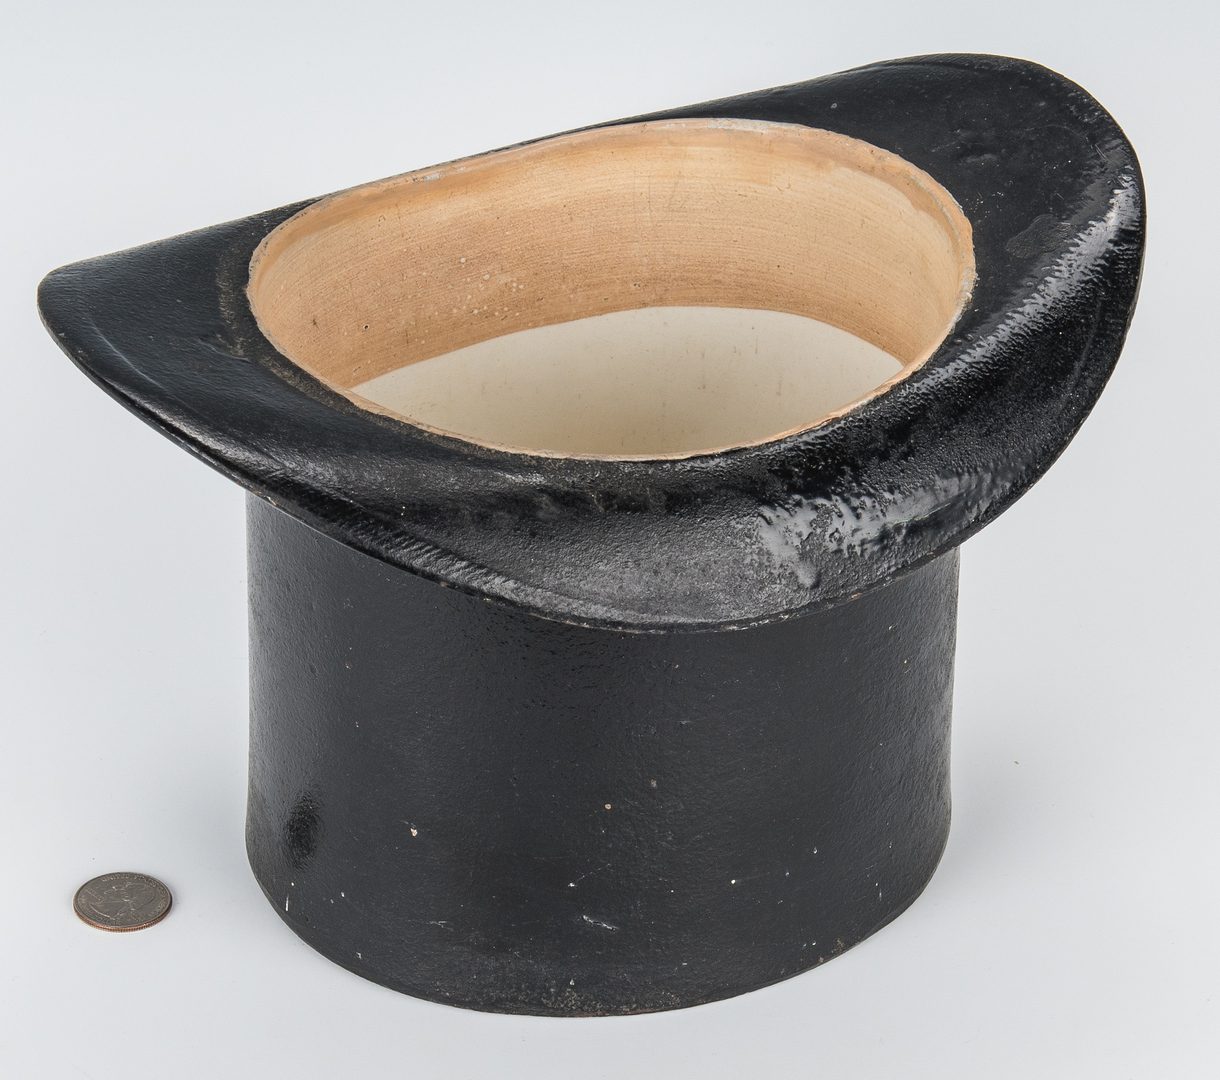 Lot 108: Cast Iron Top Hat Spittoon or Planter | Case Auctions